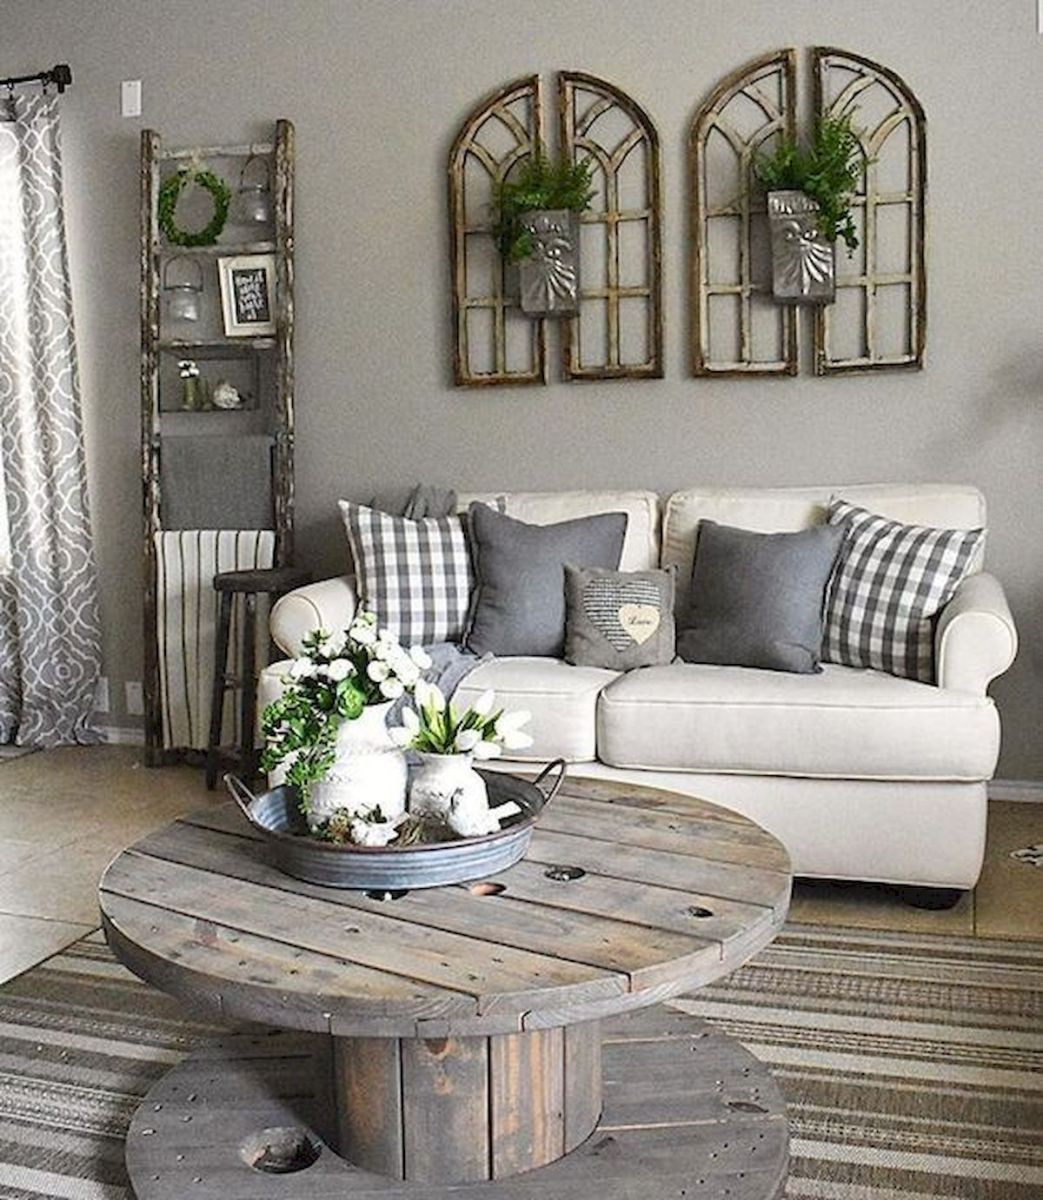 Wall Hangings For Living Room
 75 Best Farmhouse Wall Decor Ideas for Living Room 57